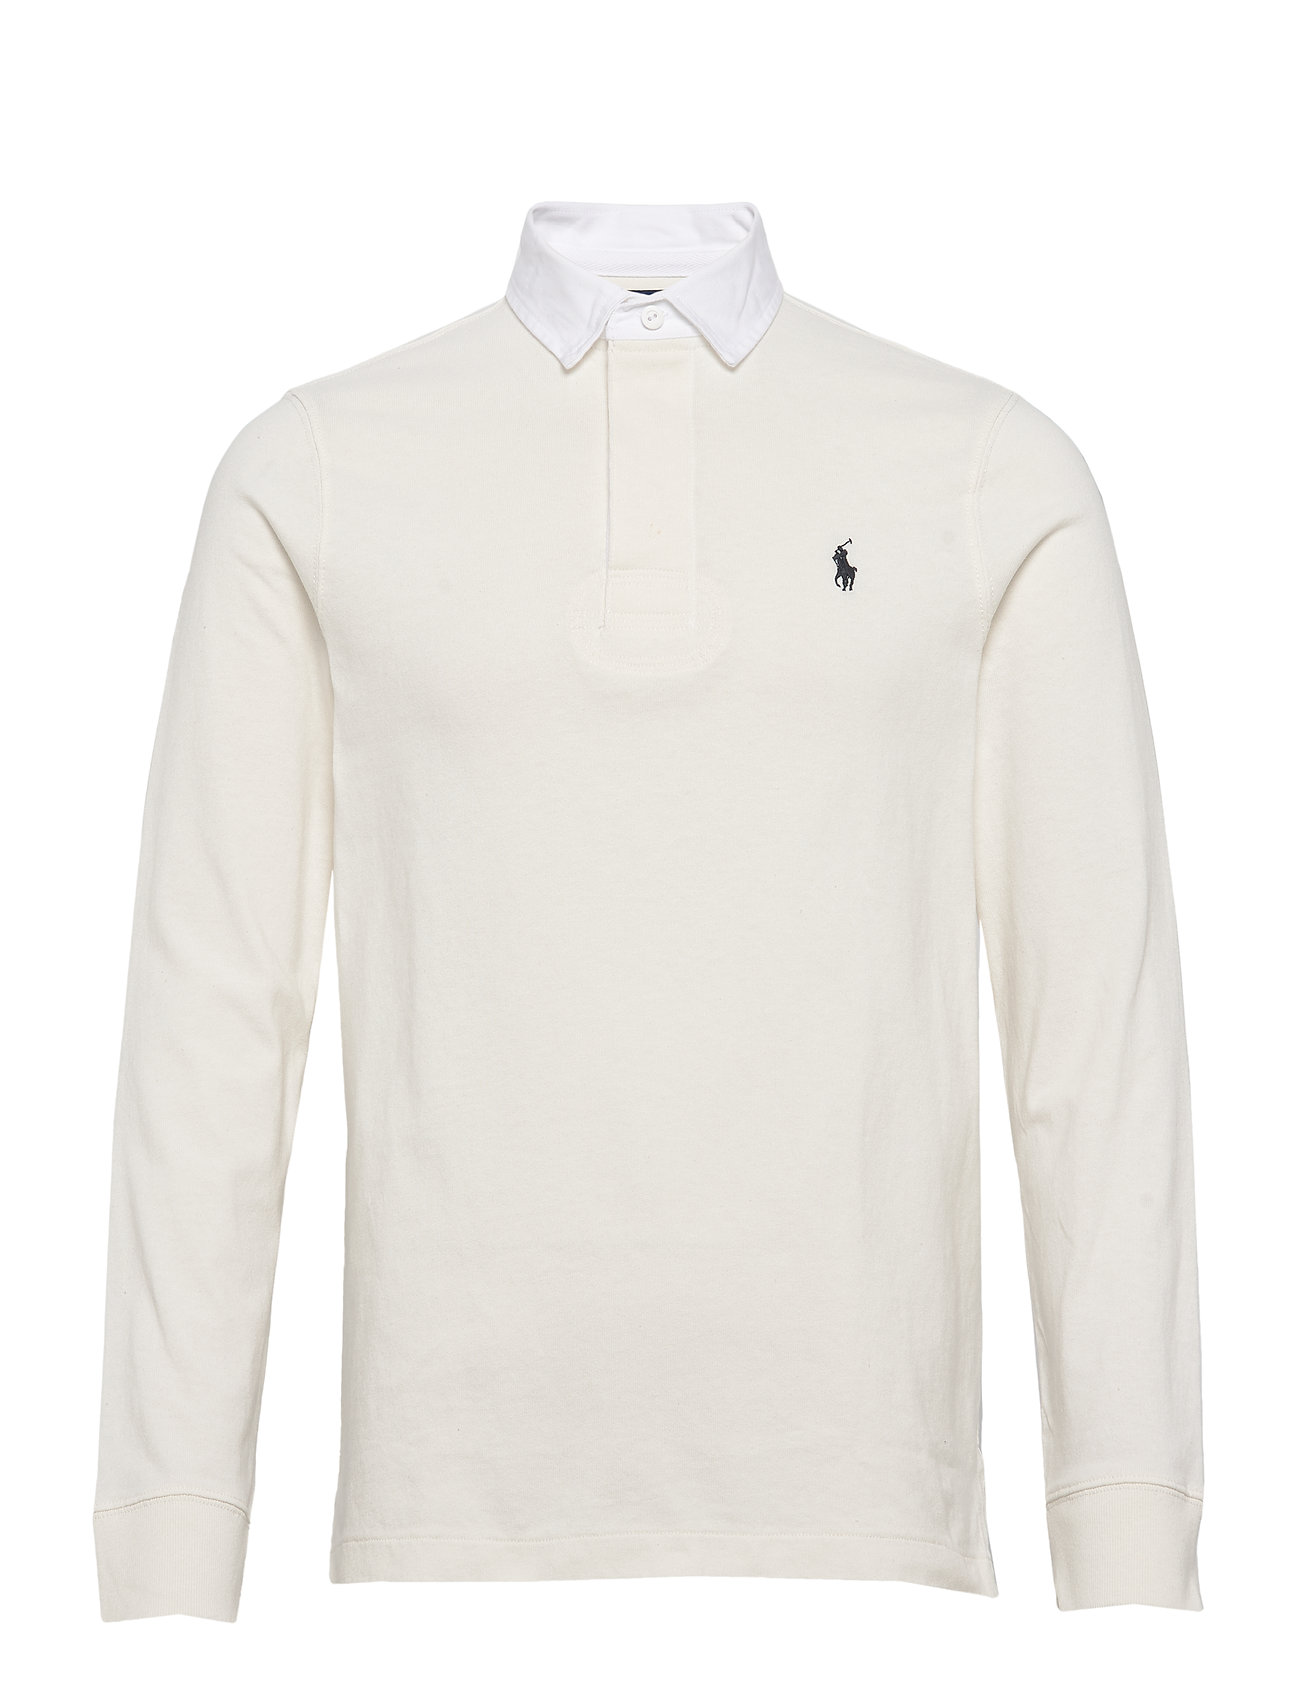 Polo Ralph Lauren The Iconic Rugby 